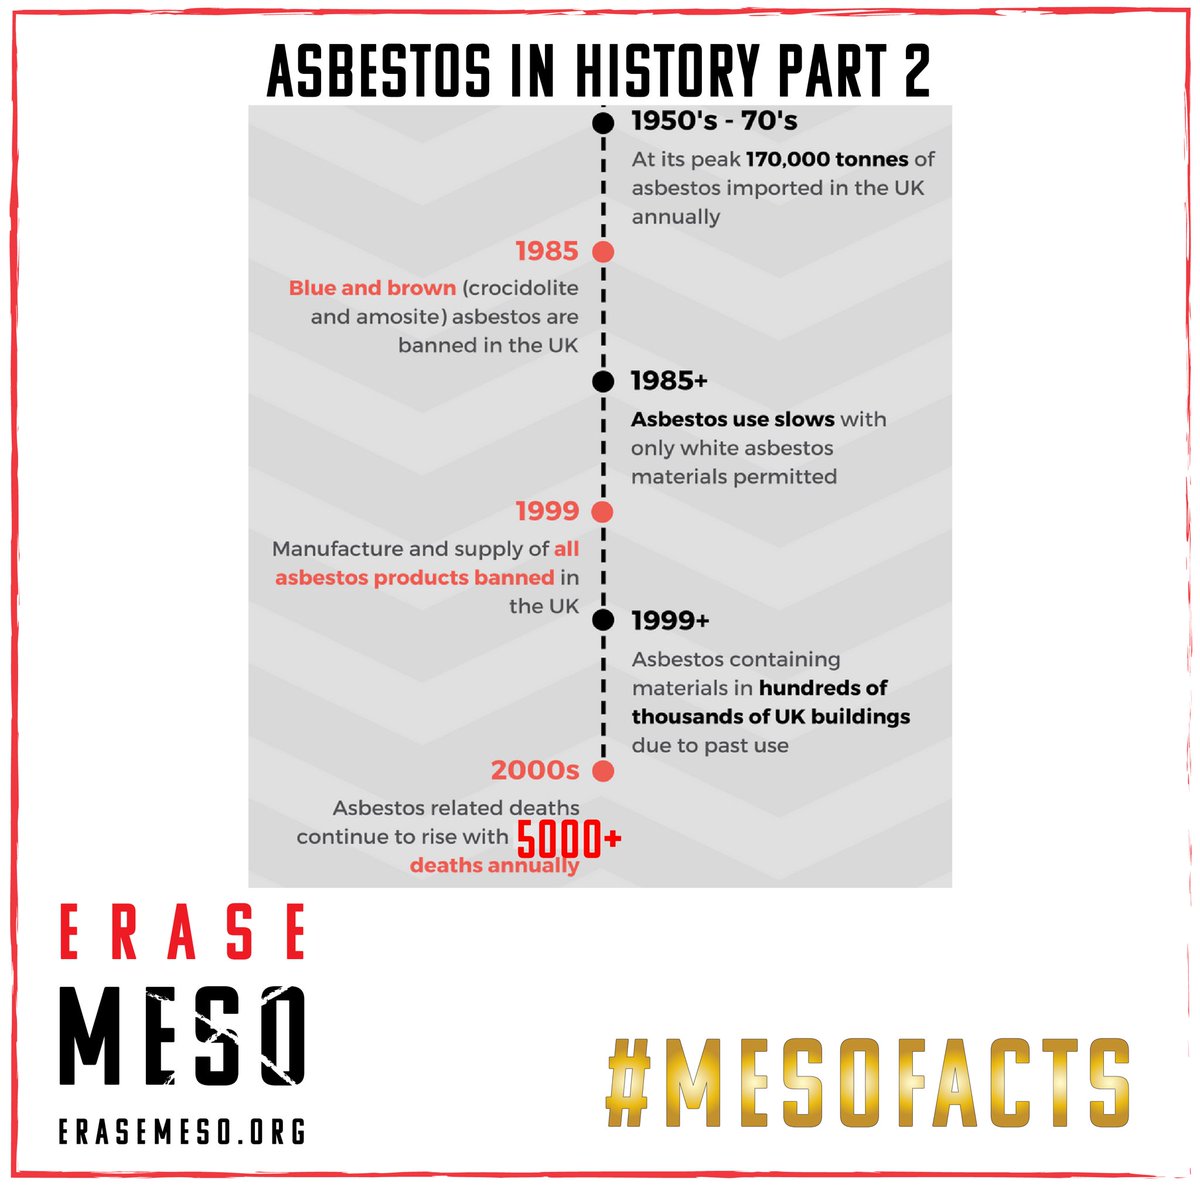 Despite asbestos being known as a silent killer for over half a century in this country, #asbestos was only banned in 1999.
#mesothelioma #asbestosis #mesotheliomaawareness #mesotheliomaresearch #asbestosremoval #asbestosawareness 
#mesofacts #erasemeso #actionmeso